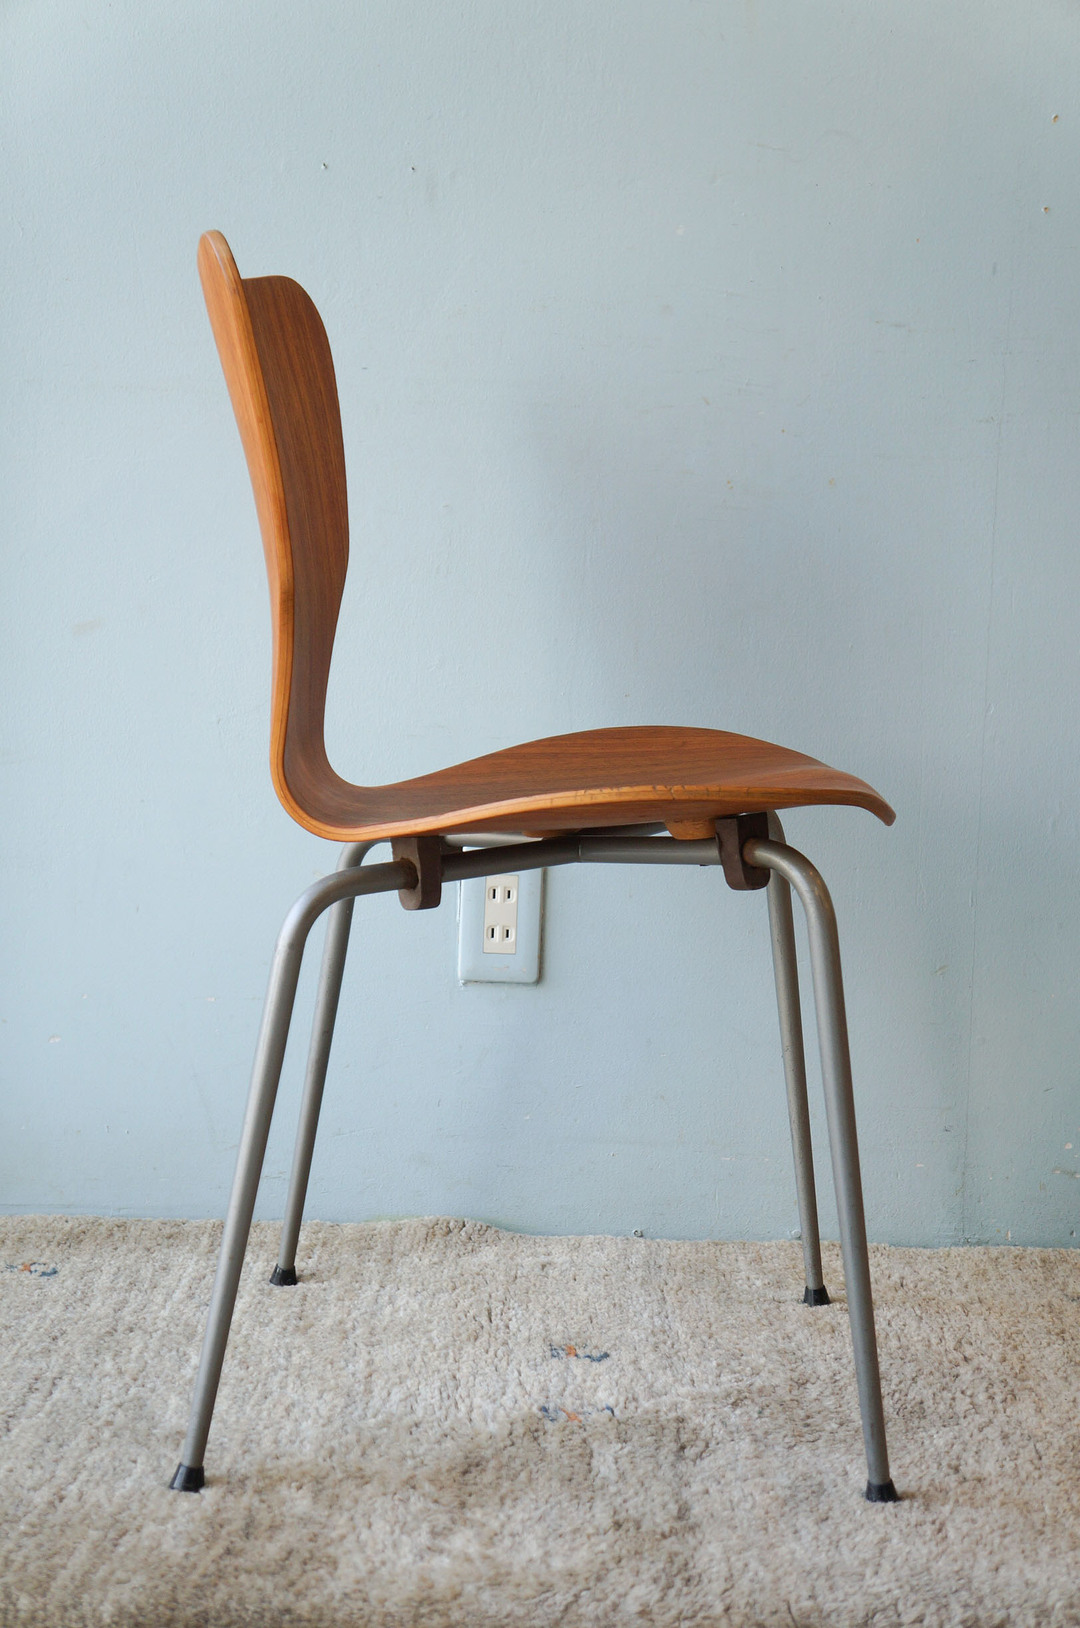 Danish Vintage Teak Plywood Stacking Chair MH Stålmøbler/デンマークヴィンテージ スタッキングチェア チーク材 プライウッド 椅子 ミッドセンチュリー モダン 北欧家具 8